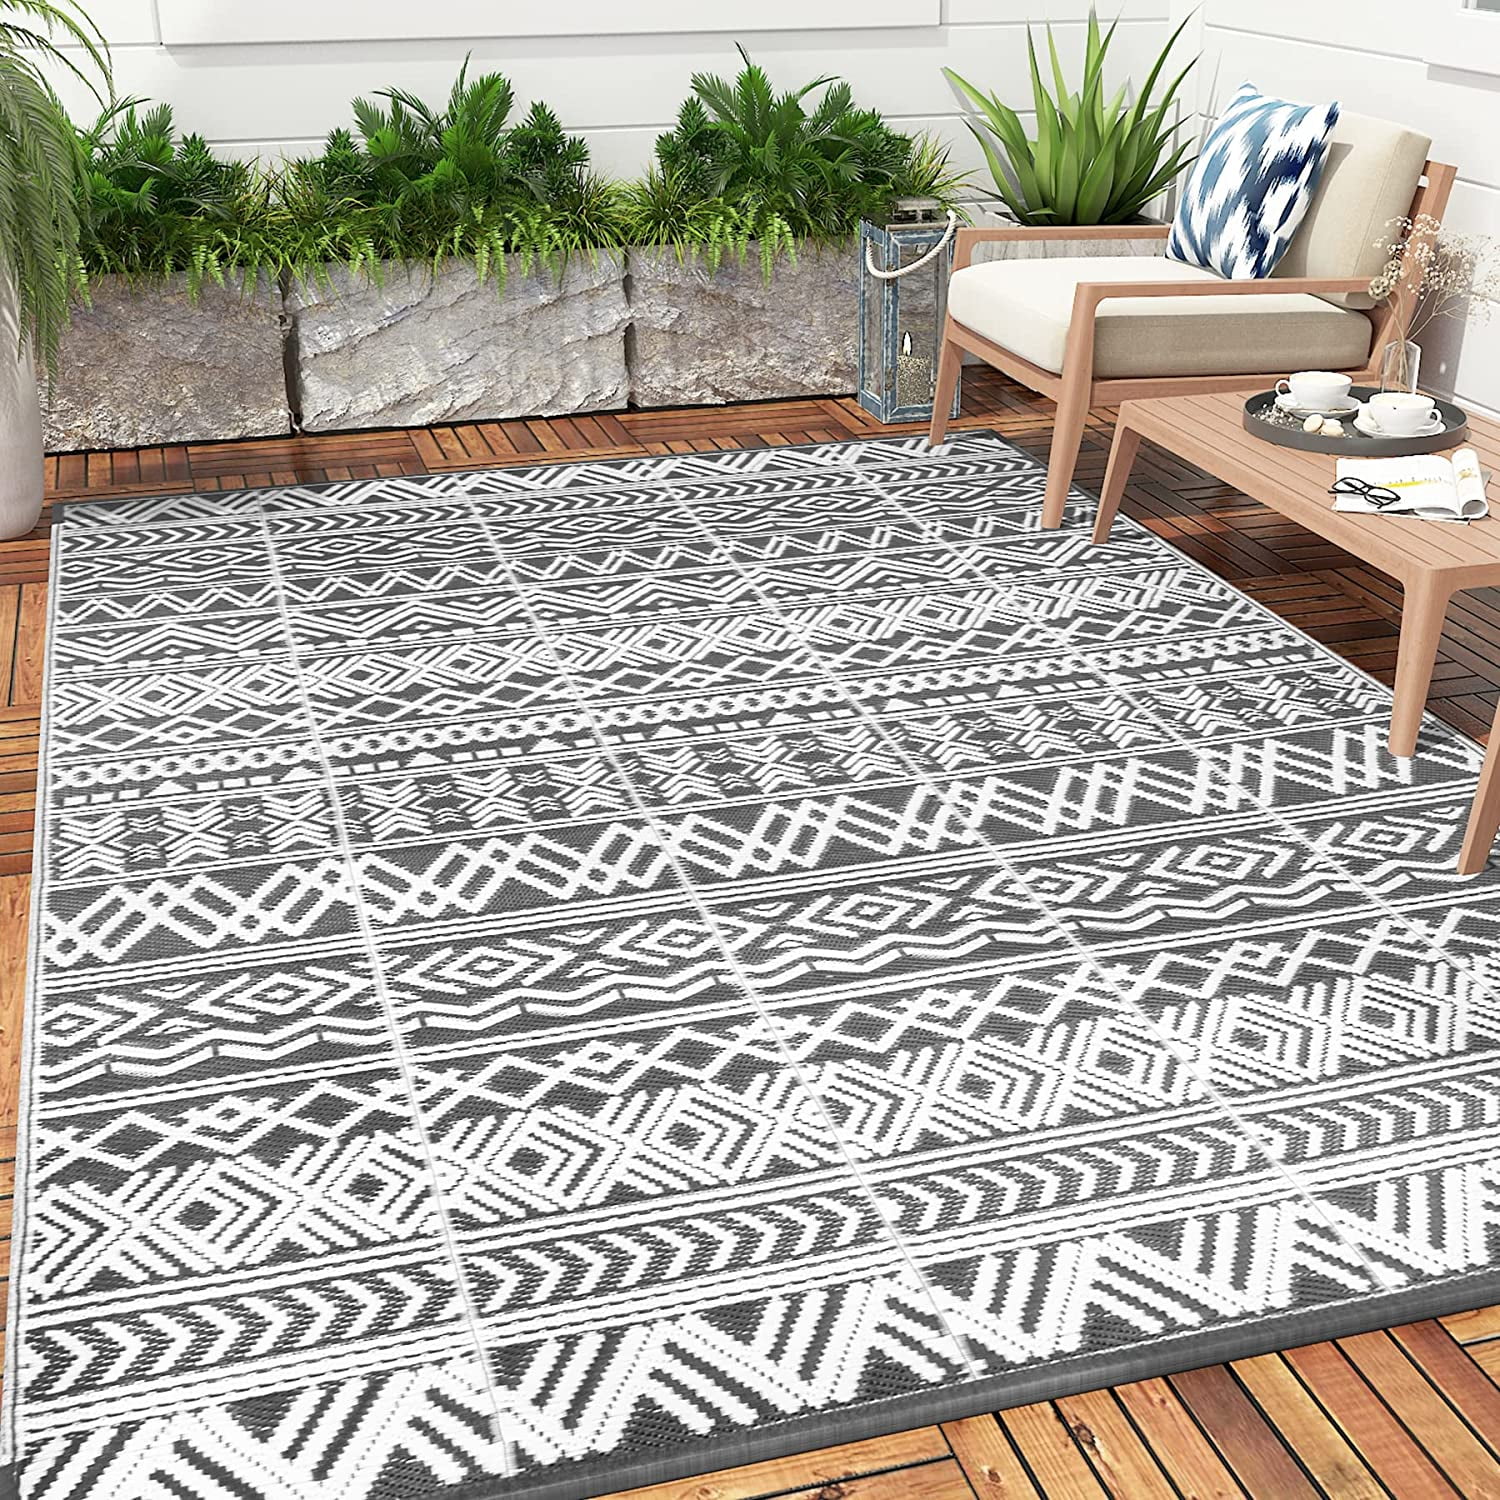 MontVoo-Outdoor Rug Carpet for Patio RV Camping 6x9ft Waterproof Reversible Portable Plastic Straw Rug Outside Indoor Outdoor Area Rug Mat for Patio Clearance Decor Balcony Picnic Geometric Boho Rug 